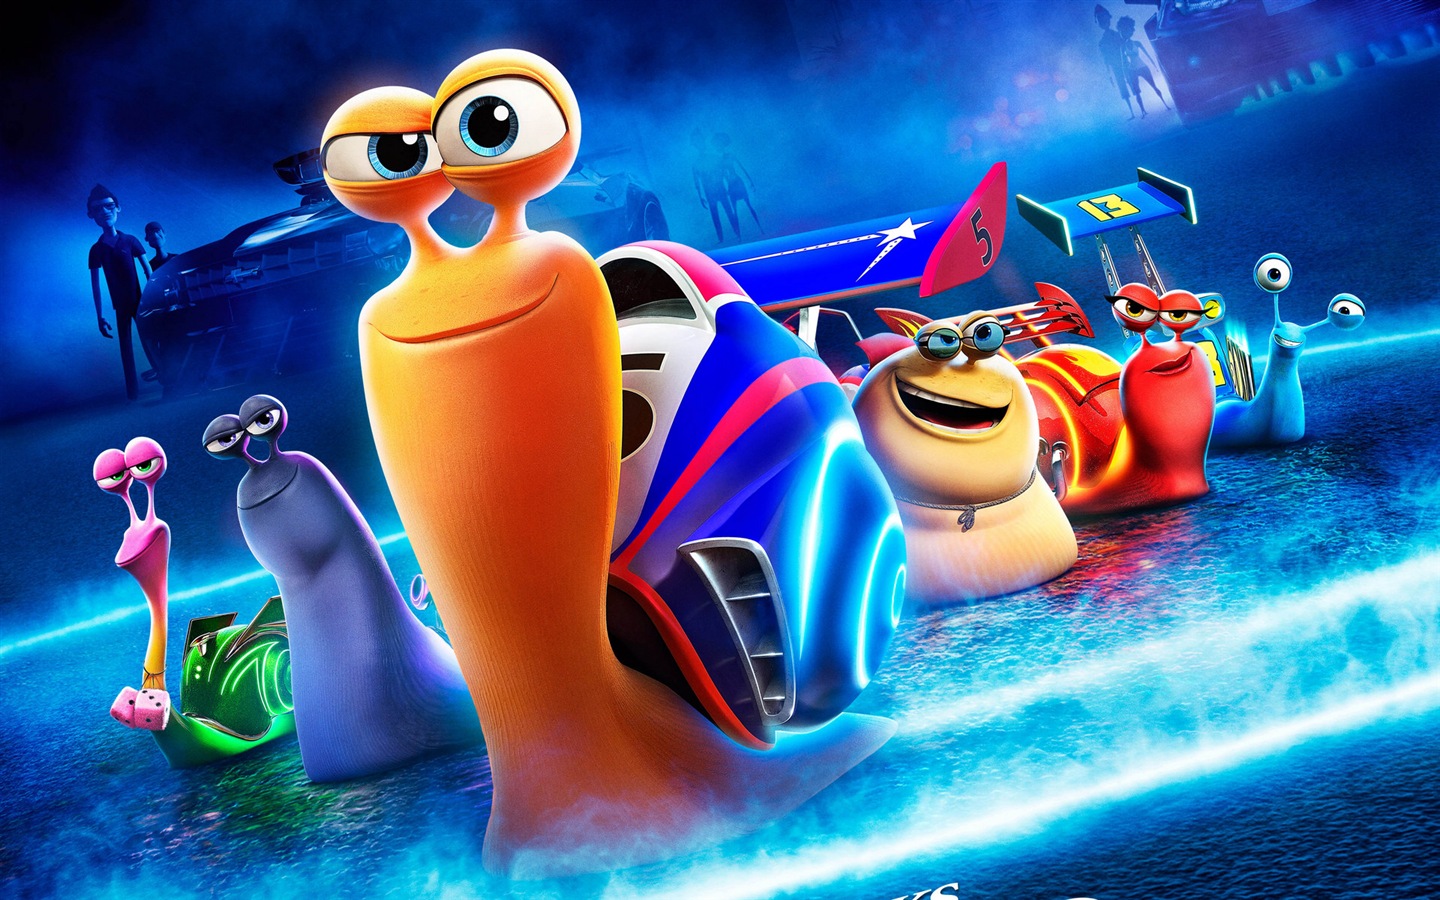 Turbo 3D movie HD wallpapers #1 - 1440x900